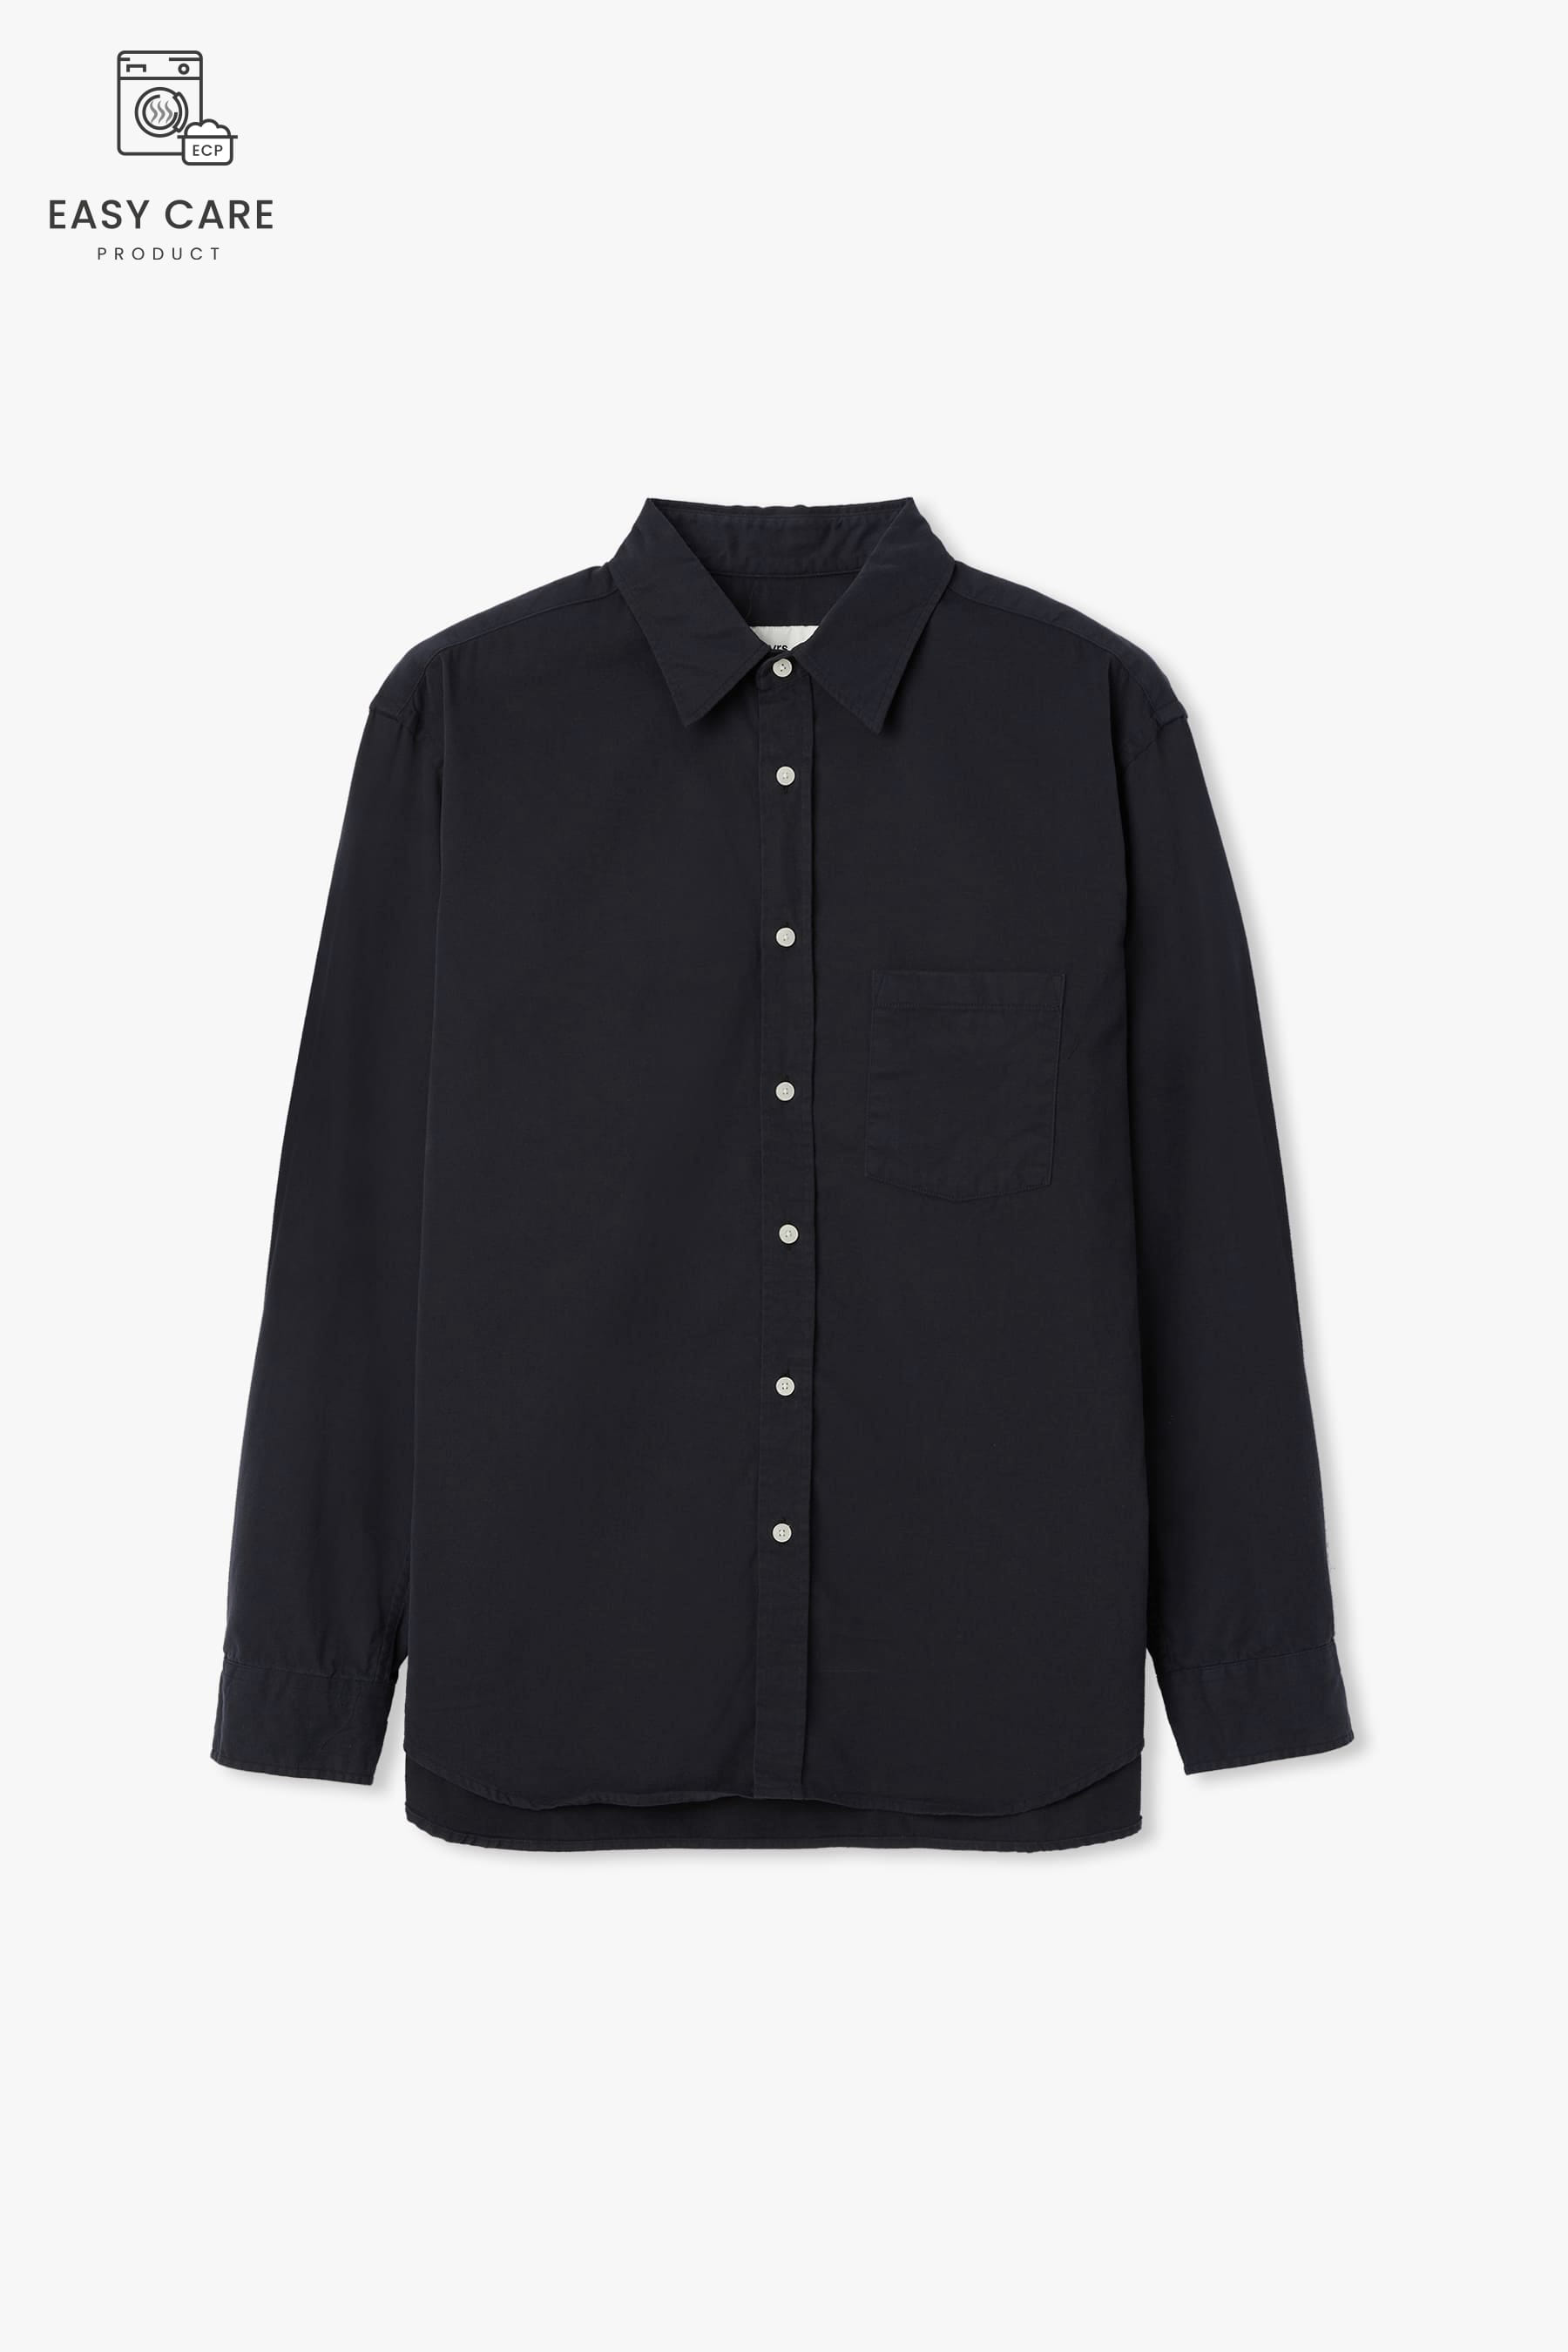 NAVY MURKY YRS POIKA COTTON DRILL WASHED SHIRTS CLASSIC FIT (ECP GARMENT PROCESS)